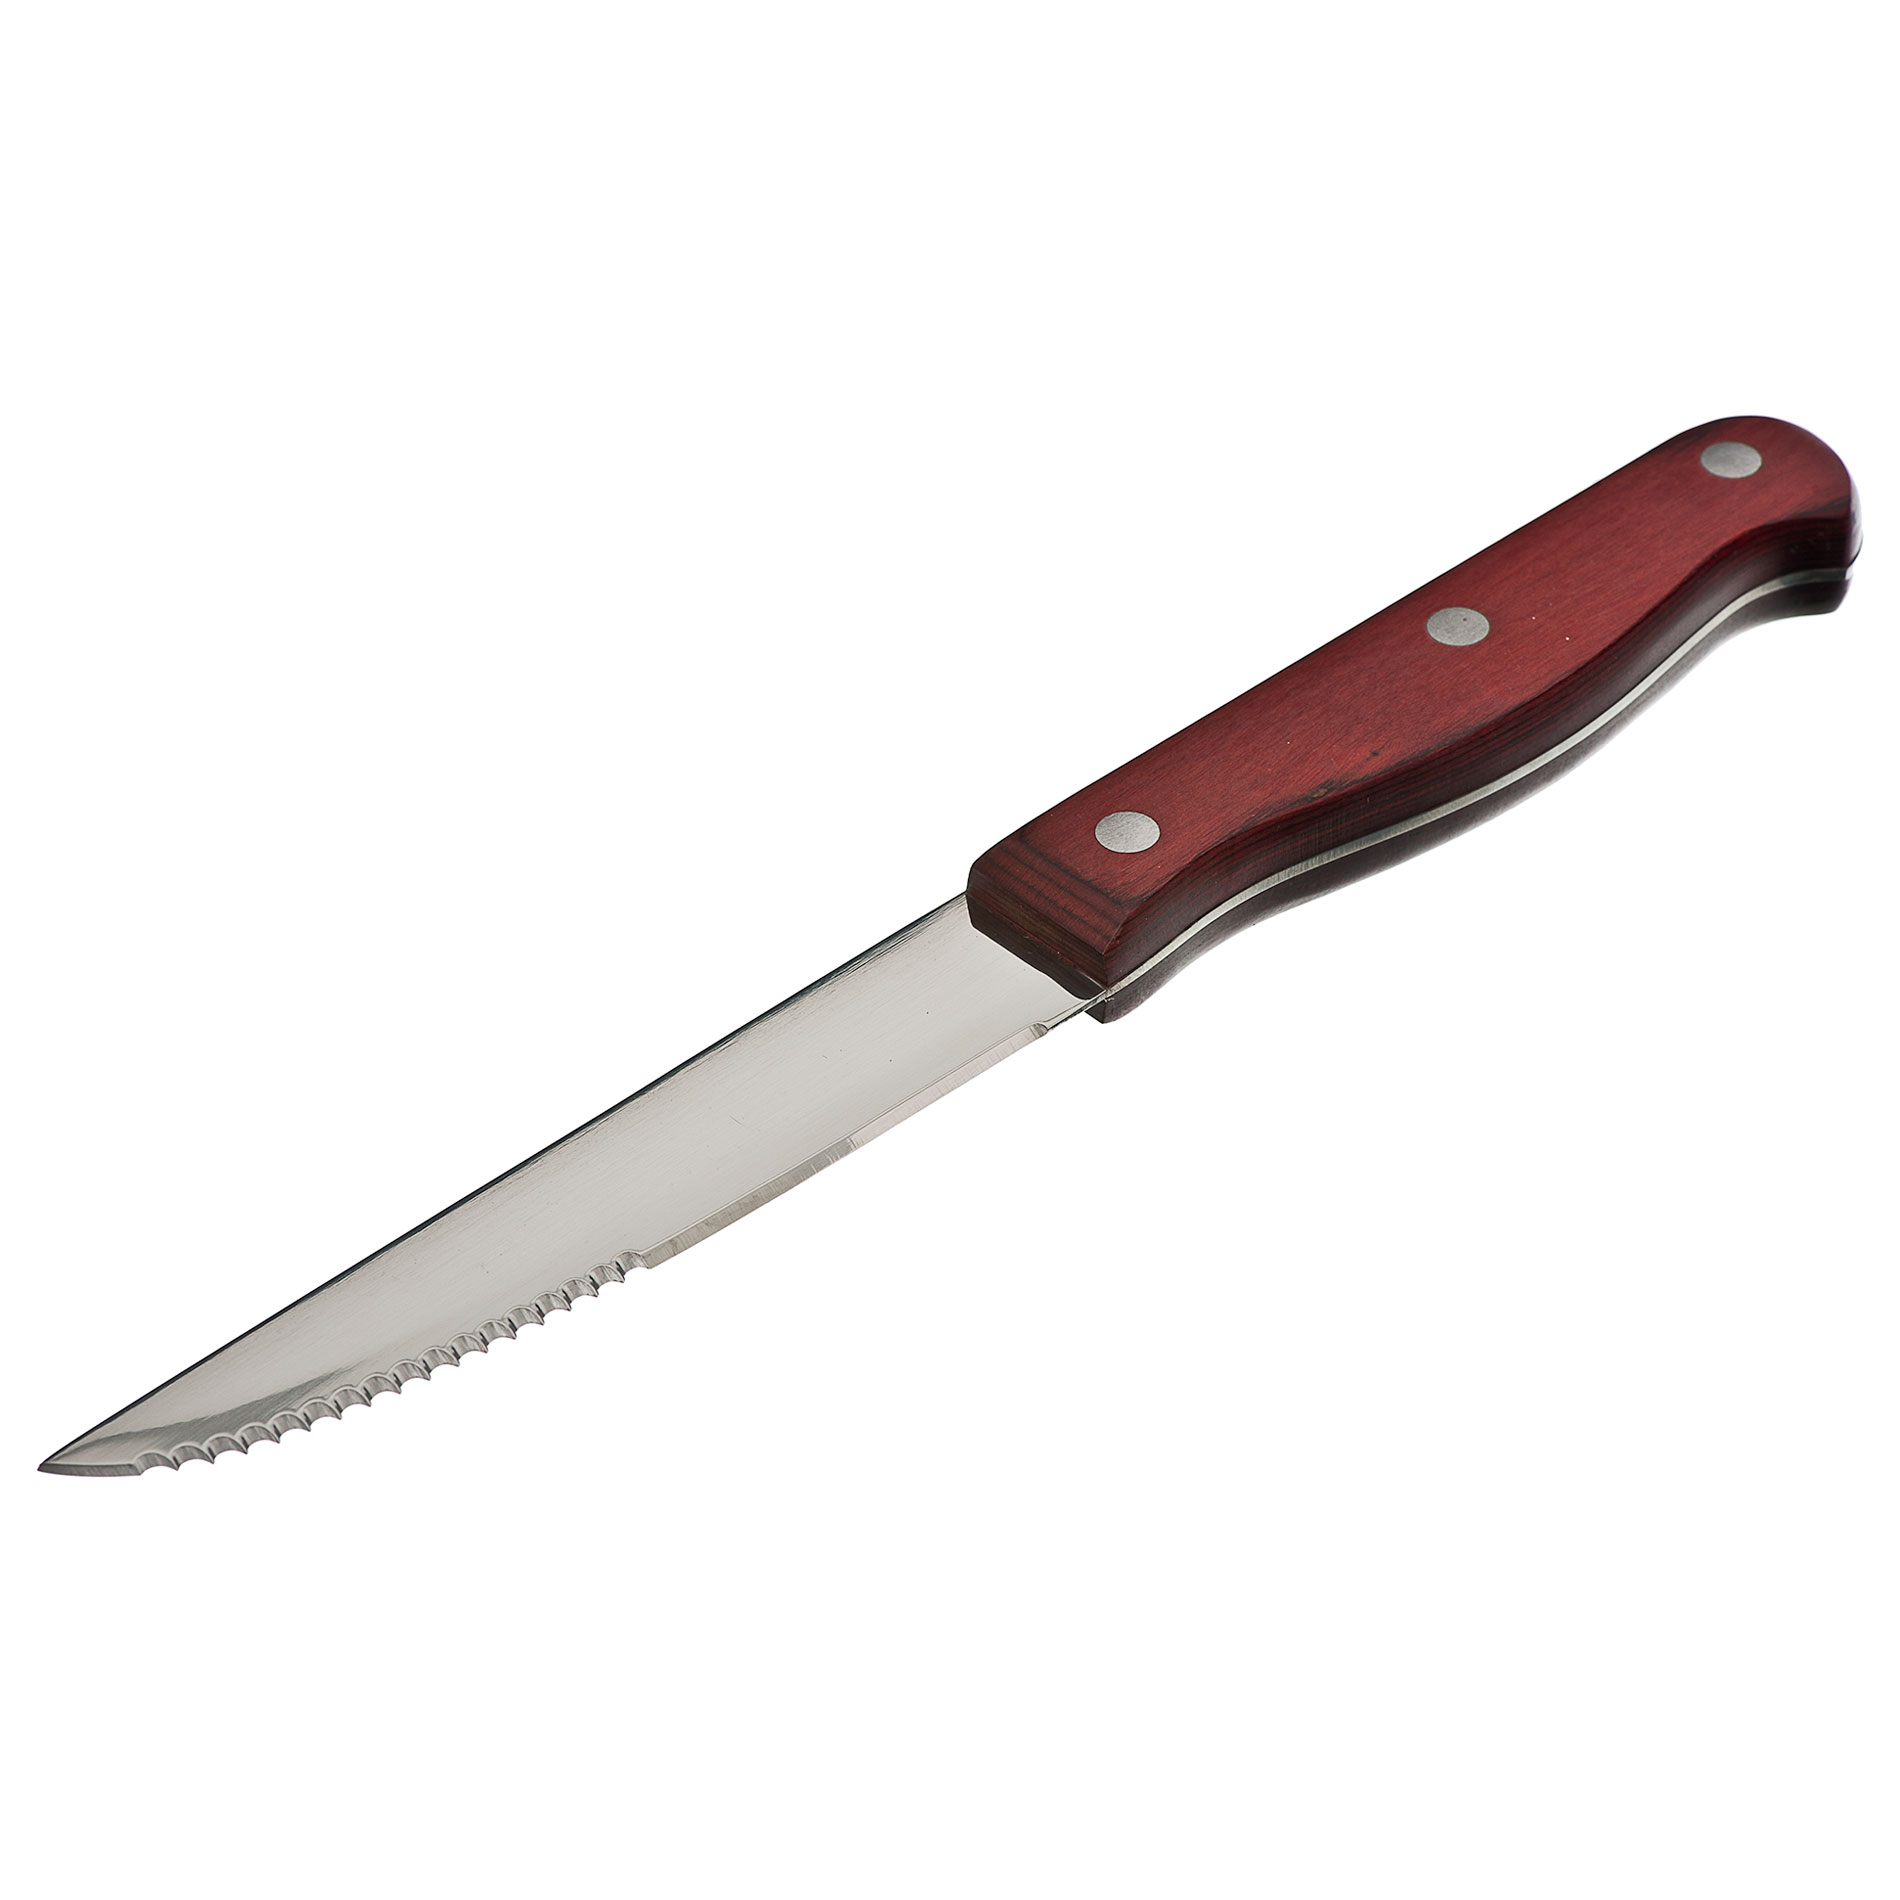 Knife Clipart this image as: